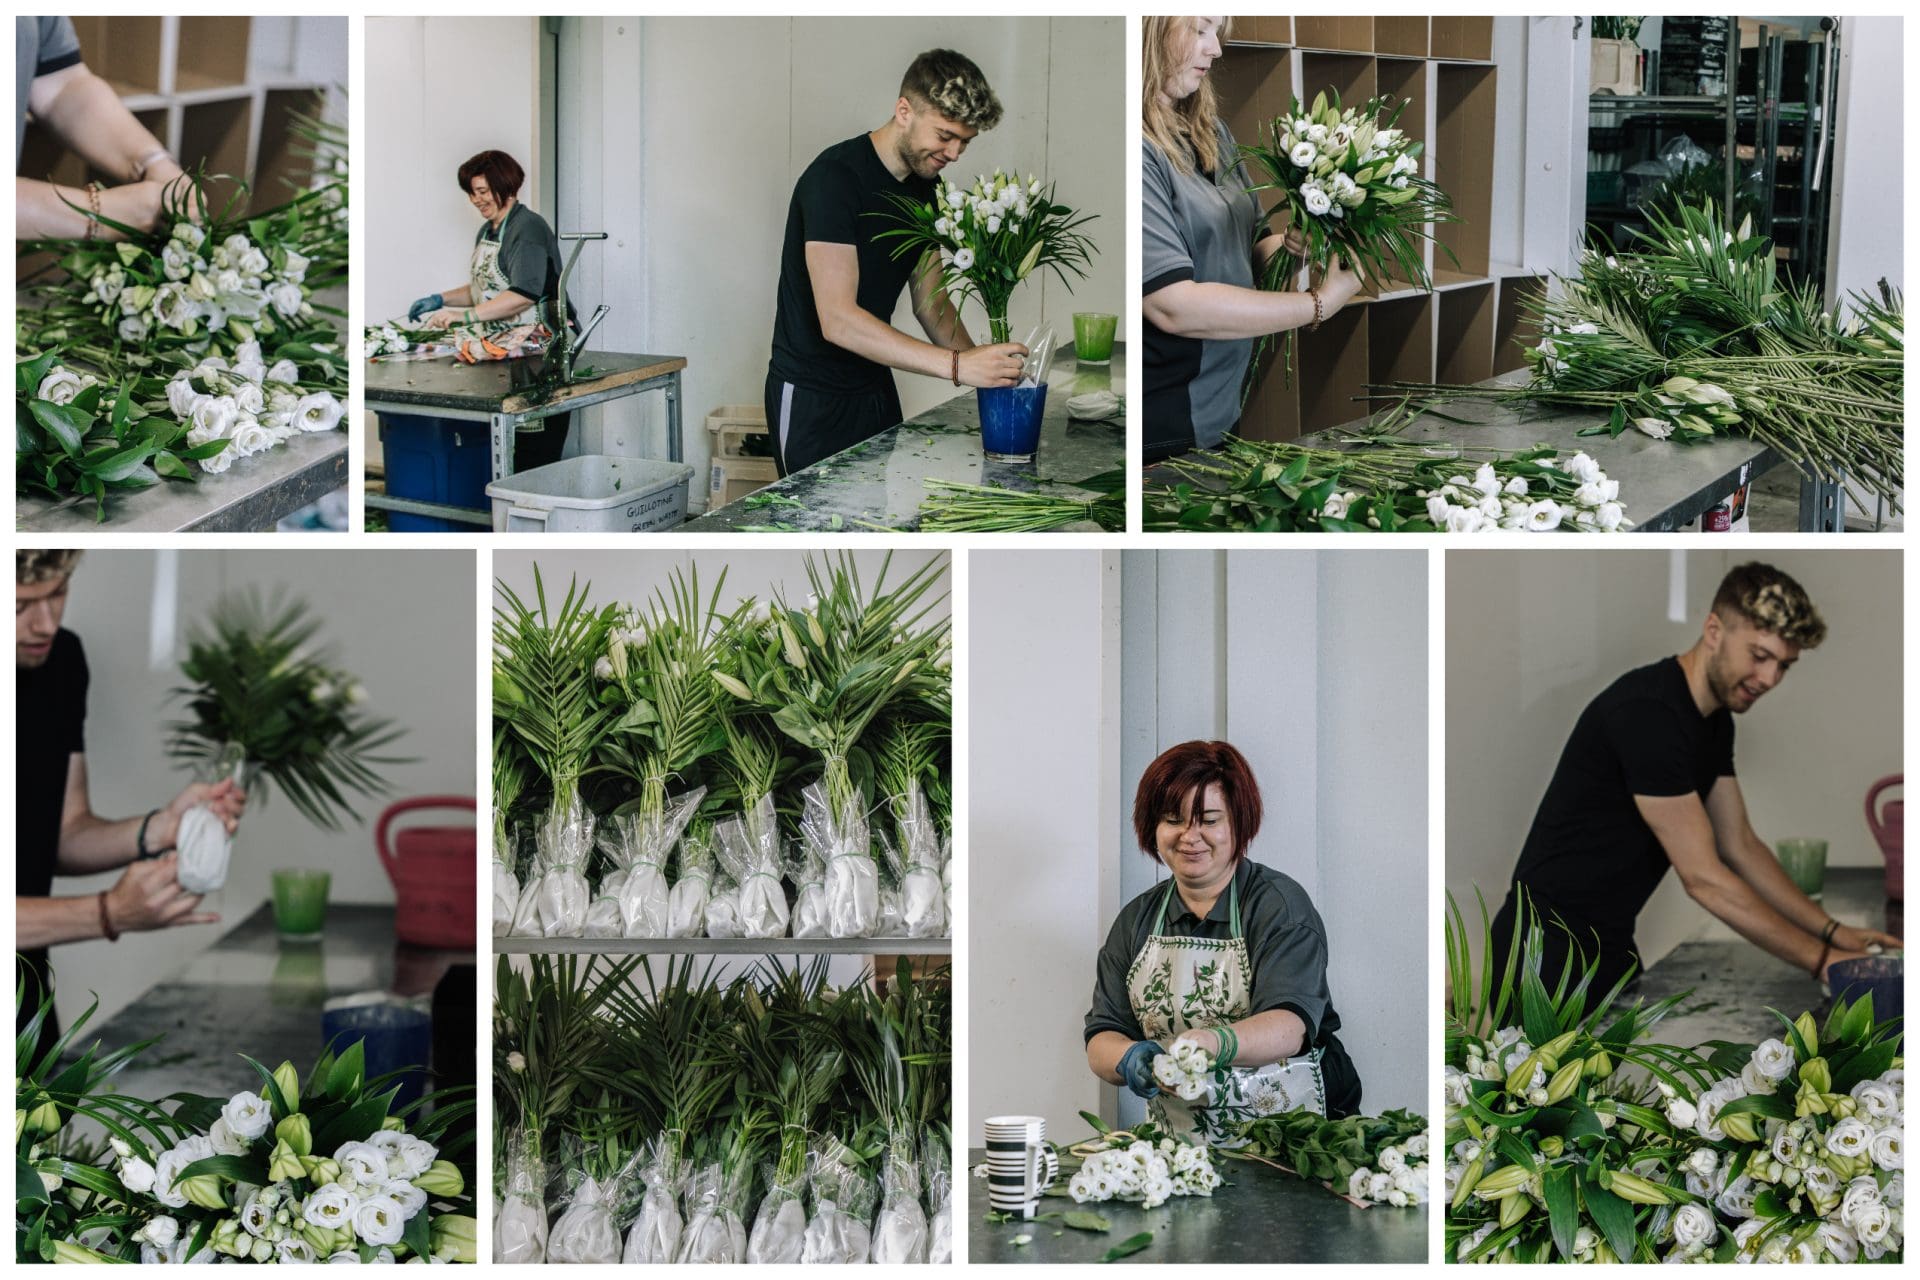 Collage showing the Planteria floristry team preparing loose bouquets of flowers to send to a nationwide pub chain